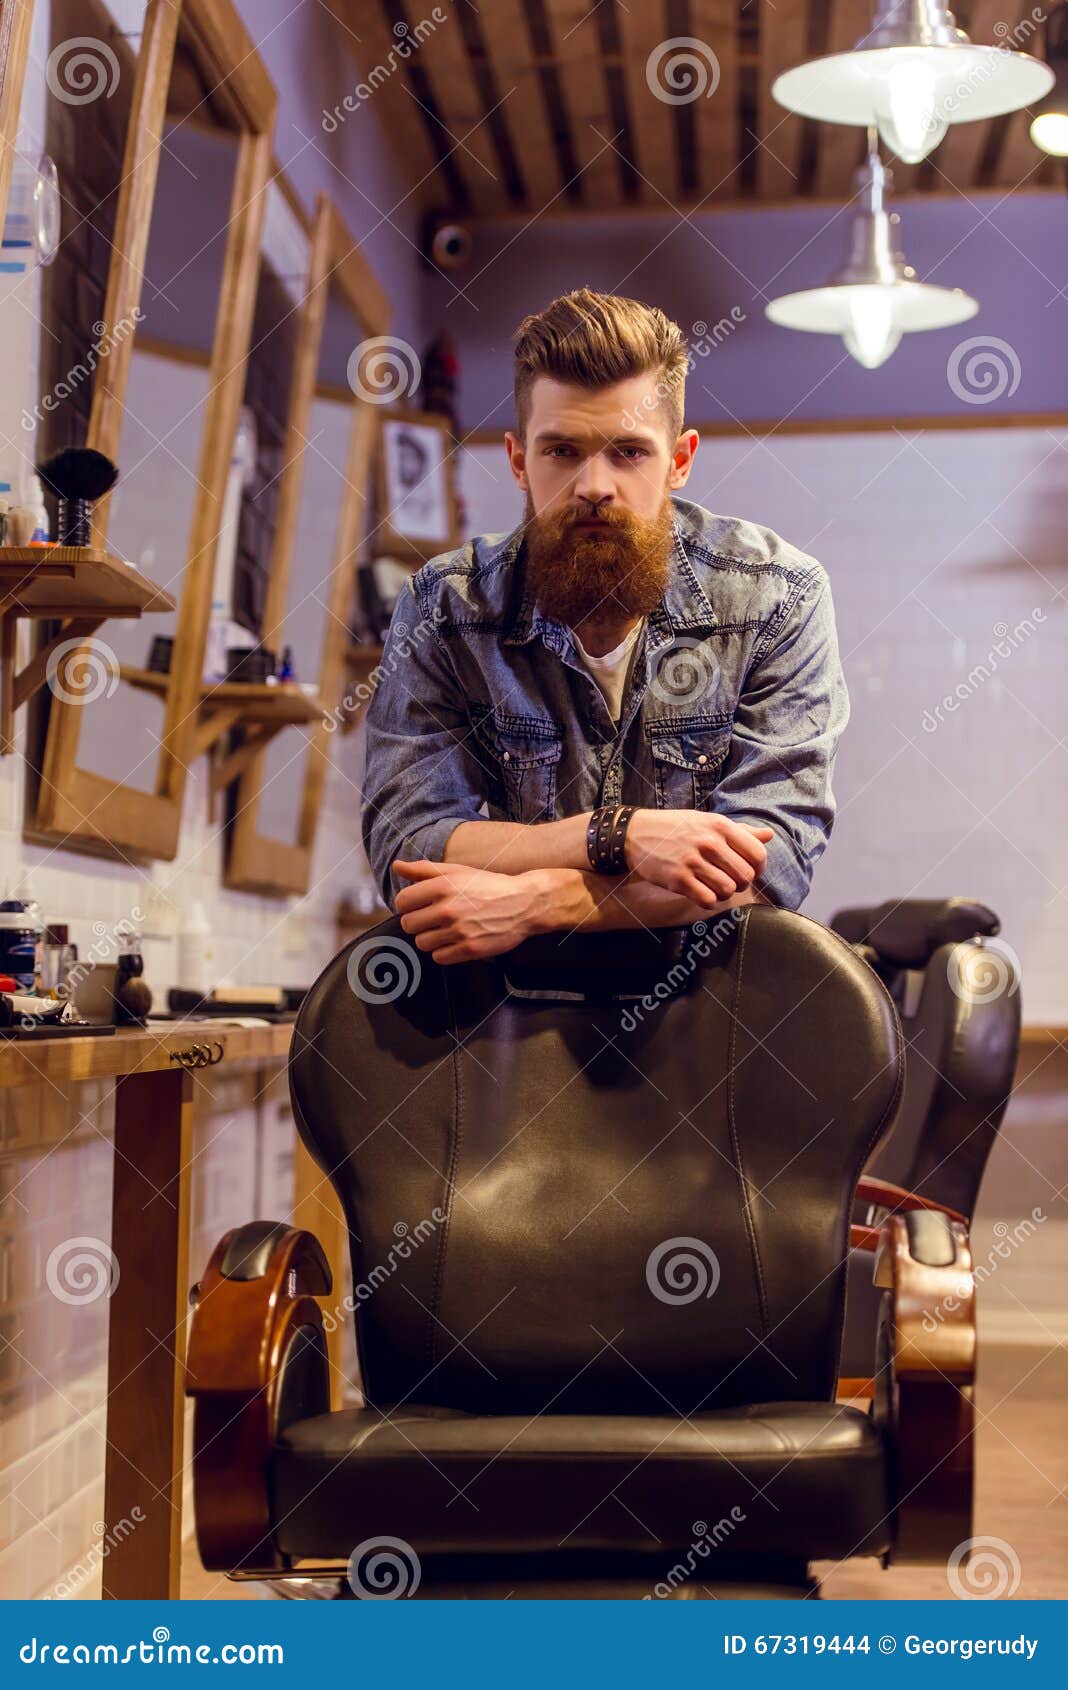 At the barber shop stock photo. Image of grooming, looking - 67319444